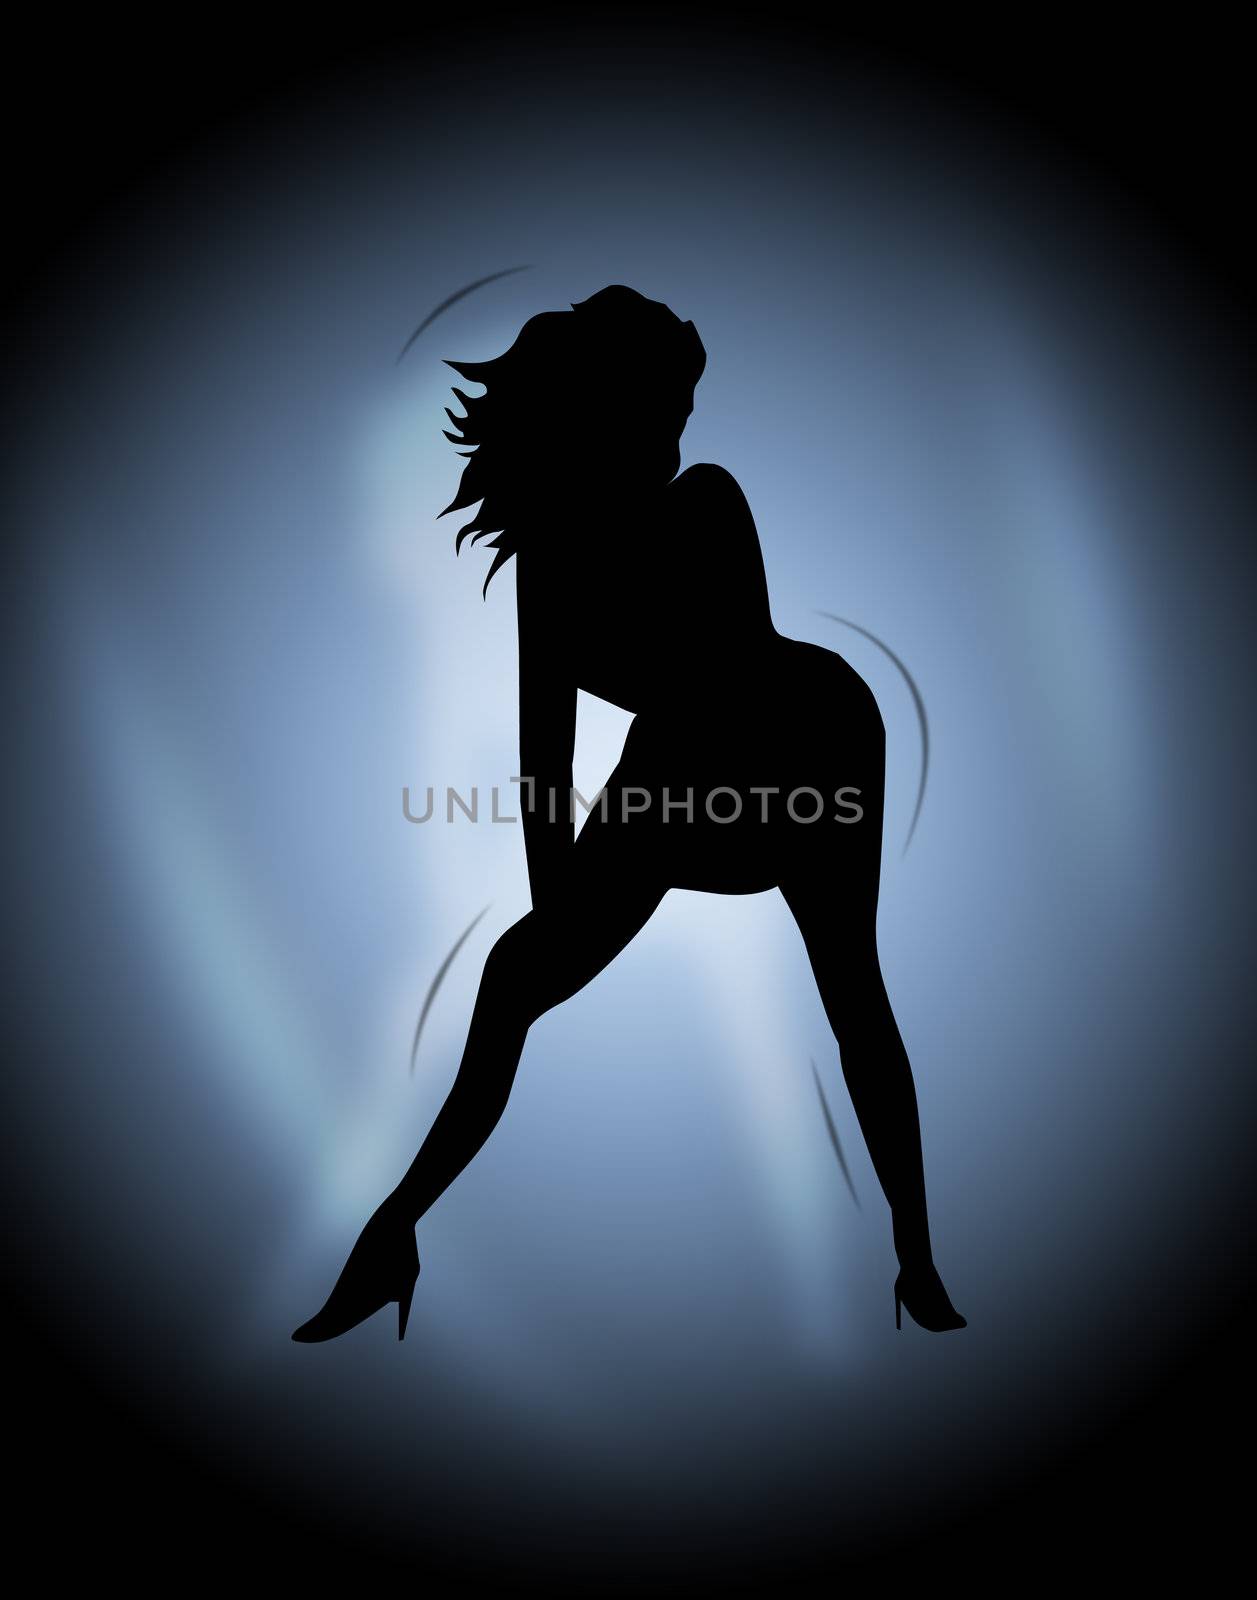 sexy lady silhouette on a gradient background